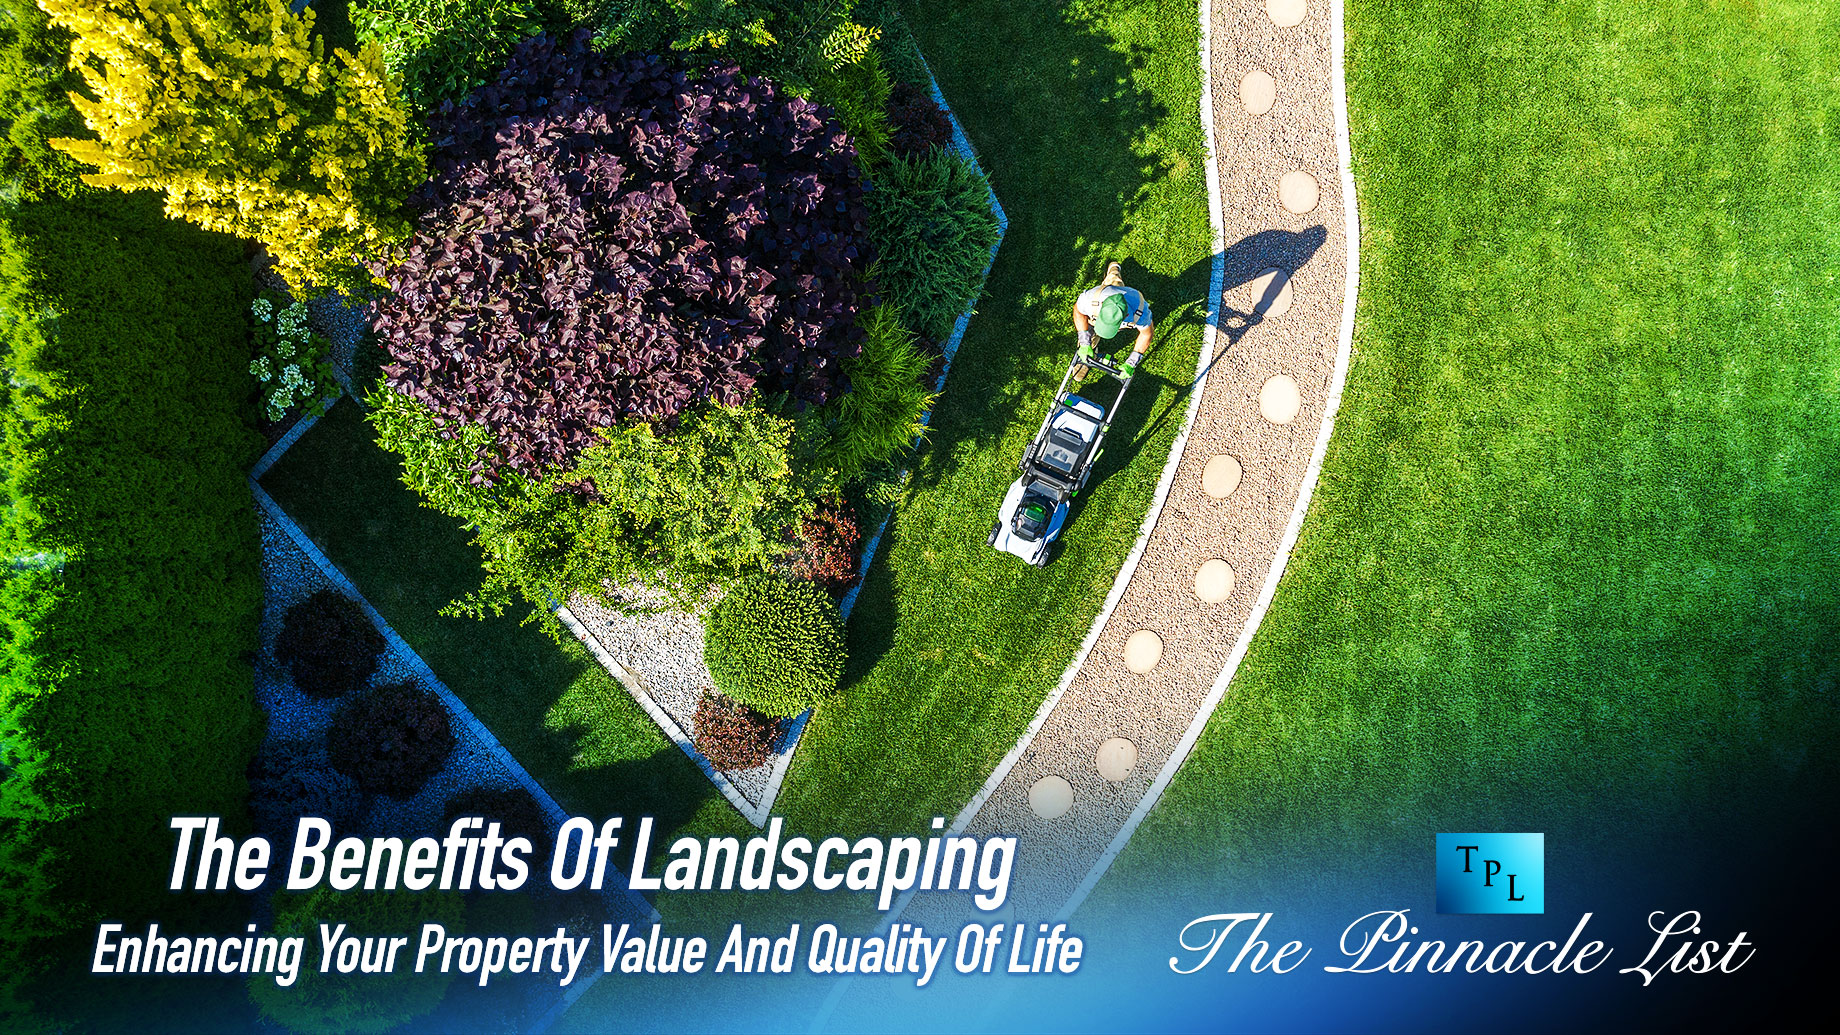 The Benefits Of Landscaping: Enhancing Your Property Value And Quality Of Life